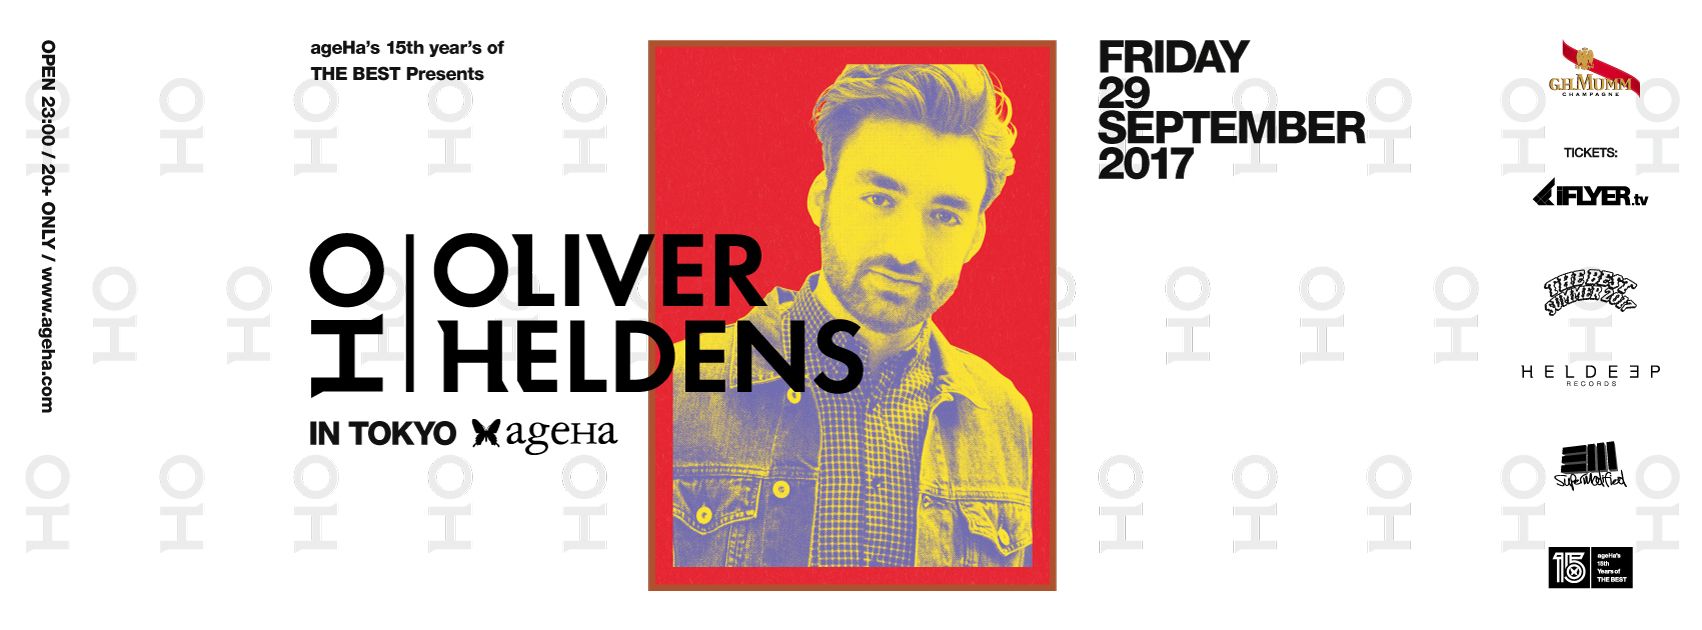 ageHa 15th year’s of THE BEST Presents OLIVER HELDENS in TOKYO Supported by G.H.MUMM&iFlyer